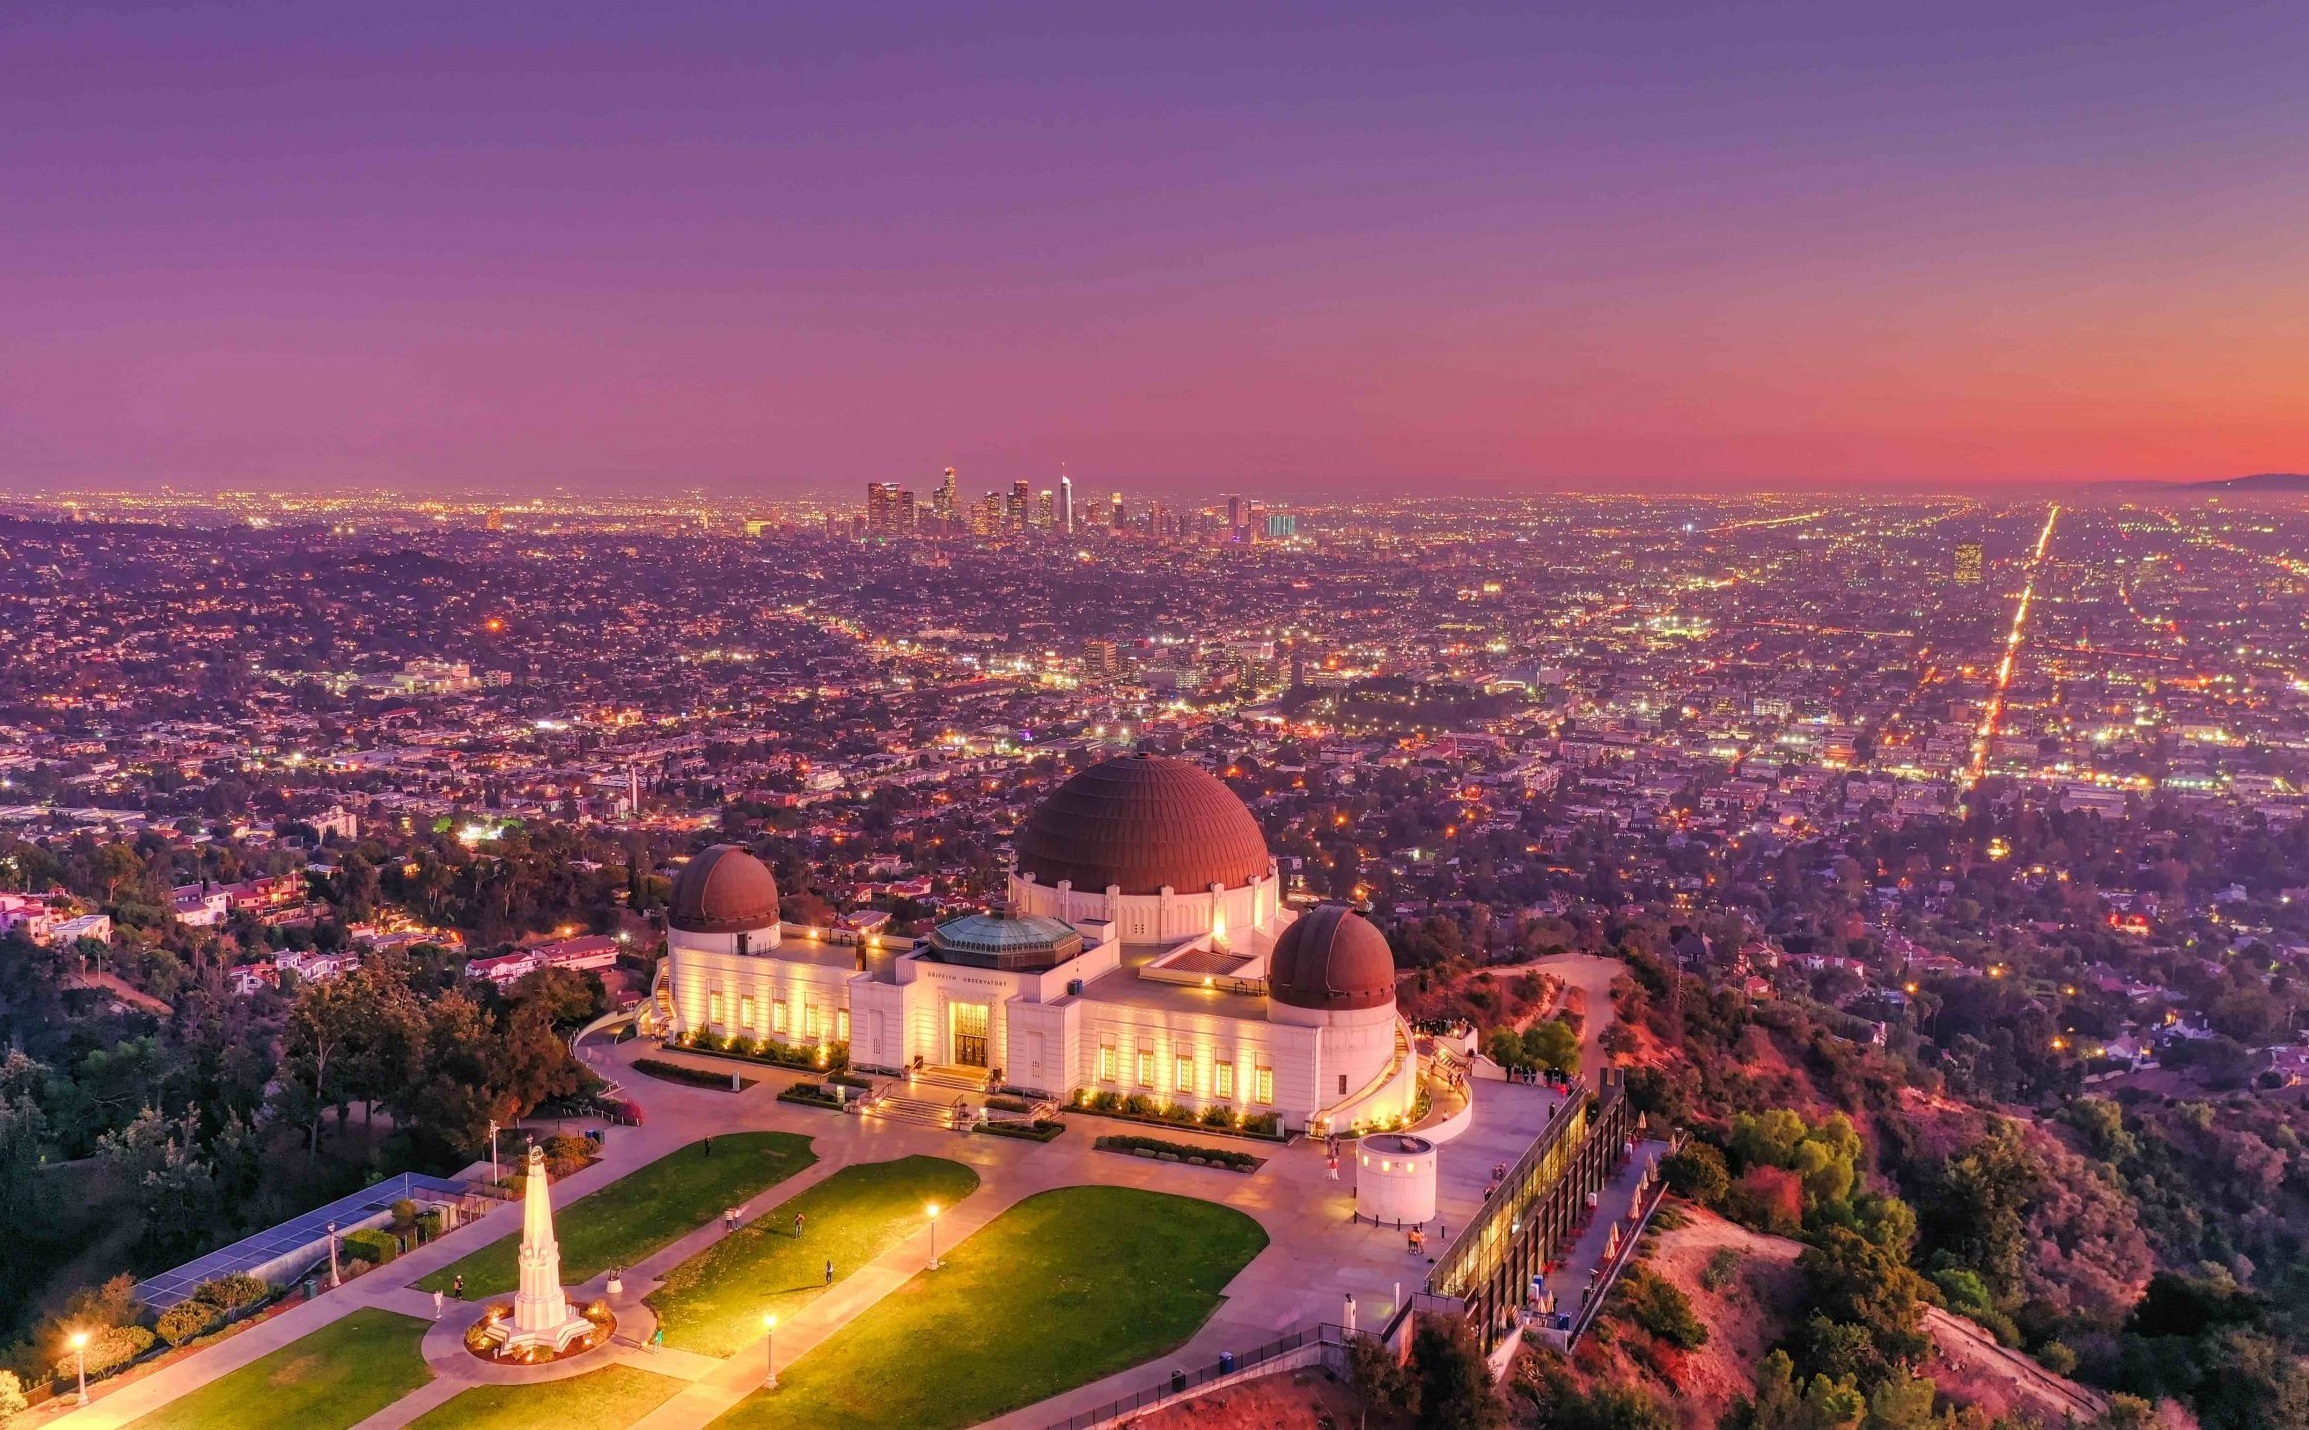 griffith-observatory-los-angeles-famous-places-to-visit-scaled.jpg